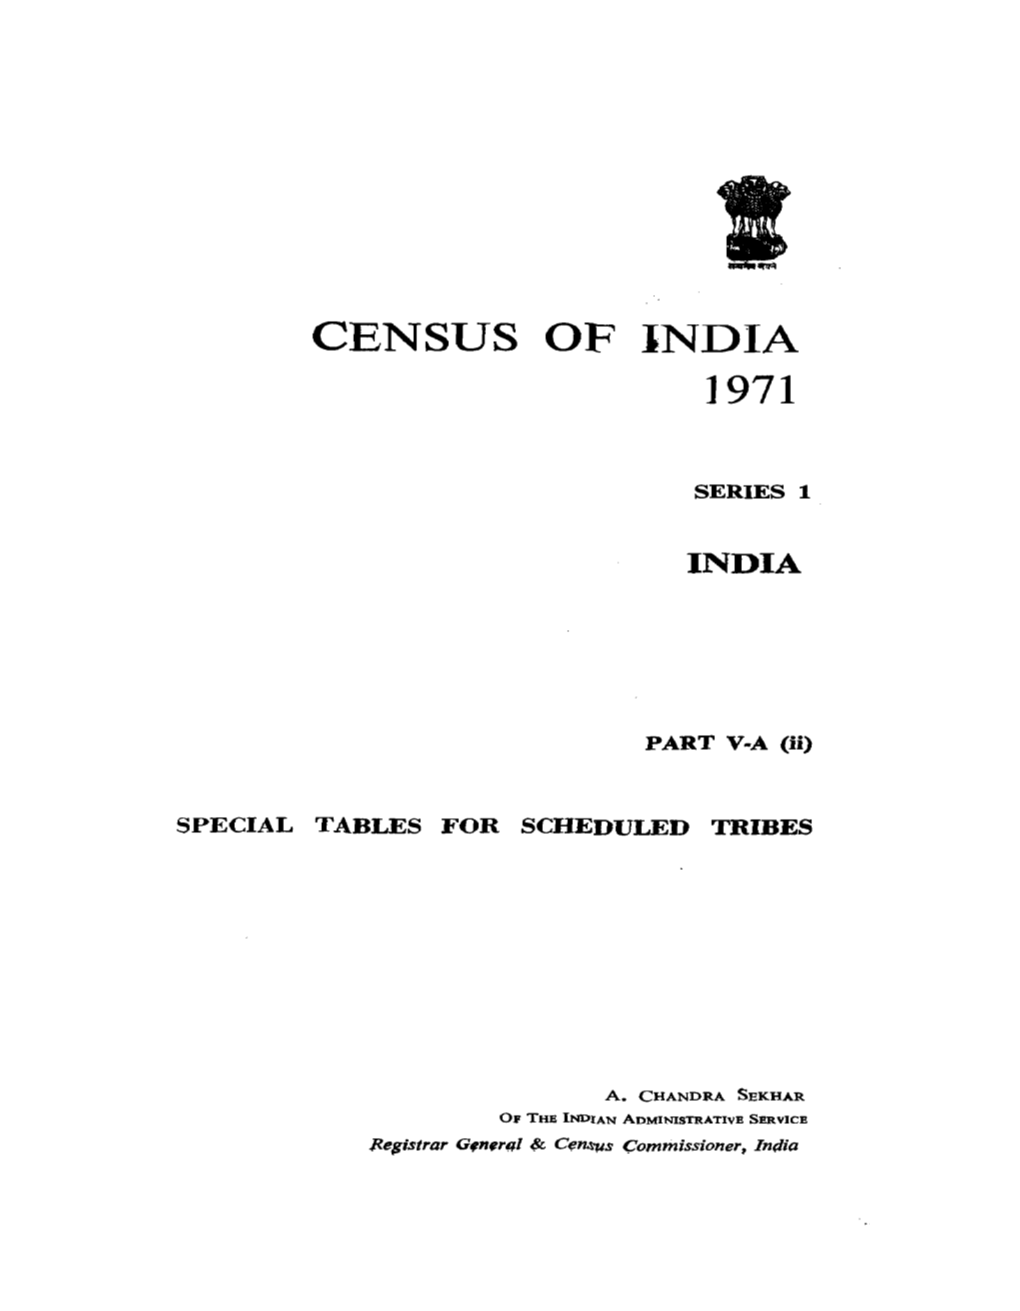 Special Tables for Scheduled Tribes, Part V-A (Ii), Series-1, India